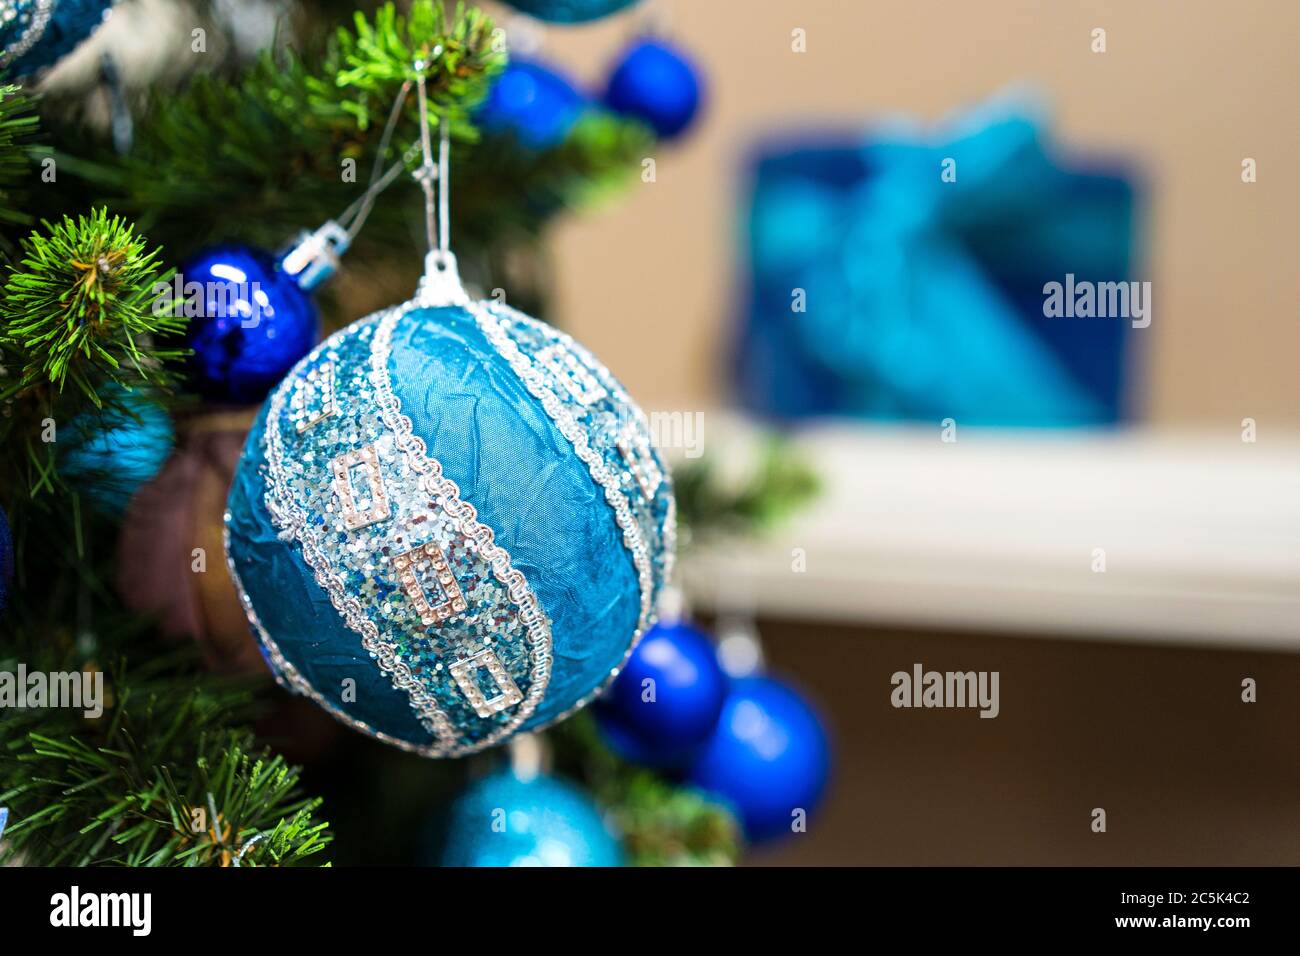 Green Christmas Tree With Beautiful White and Blue Decorations. Closed-Up shot. Big Beautiful New Year Decoration of Blue and White. Winter Season Stock Photo